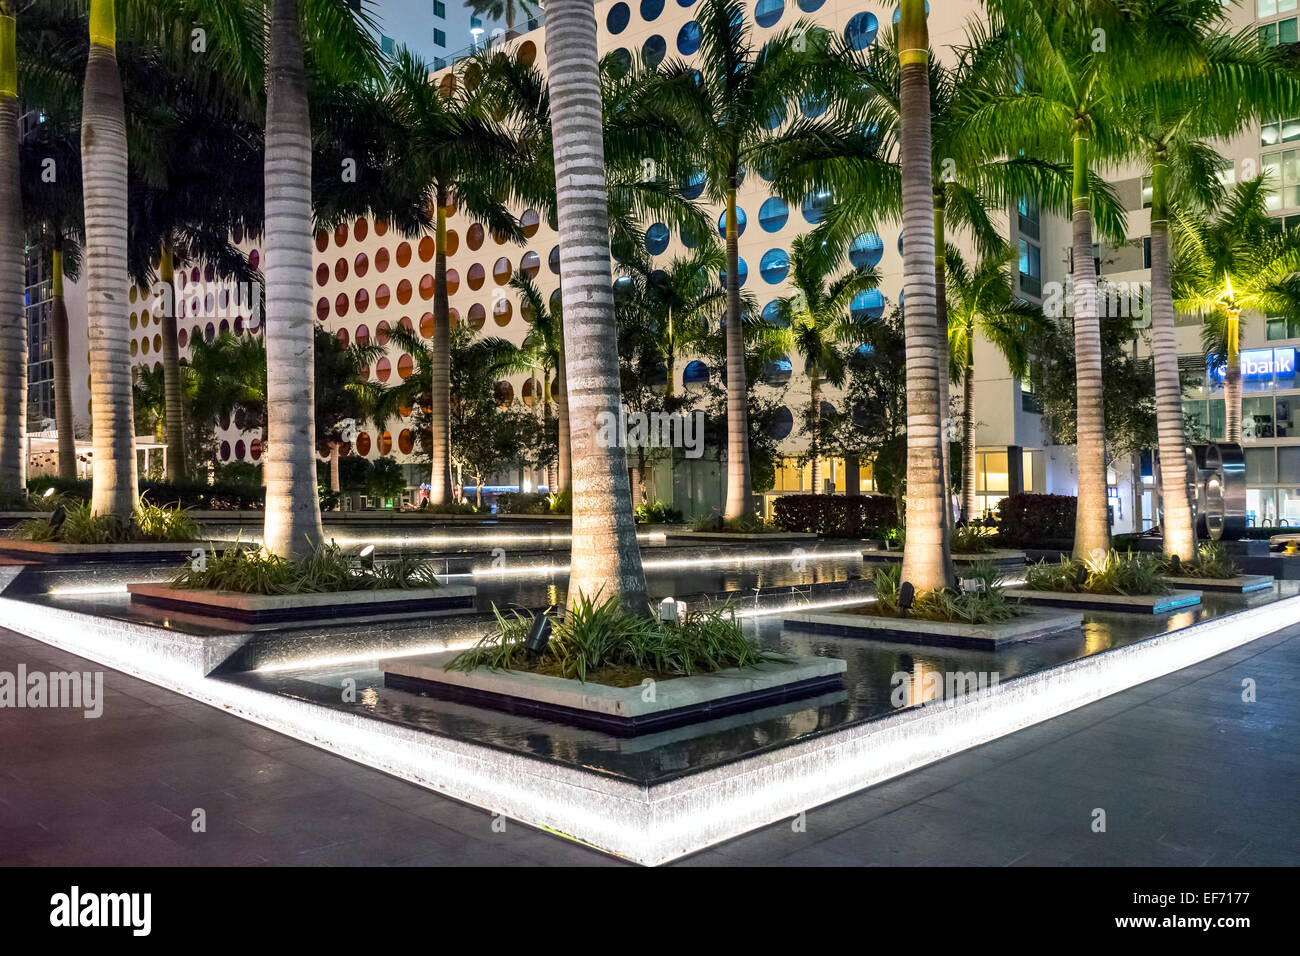 downtown-miami-brickell-bank-plaza-with-